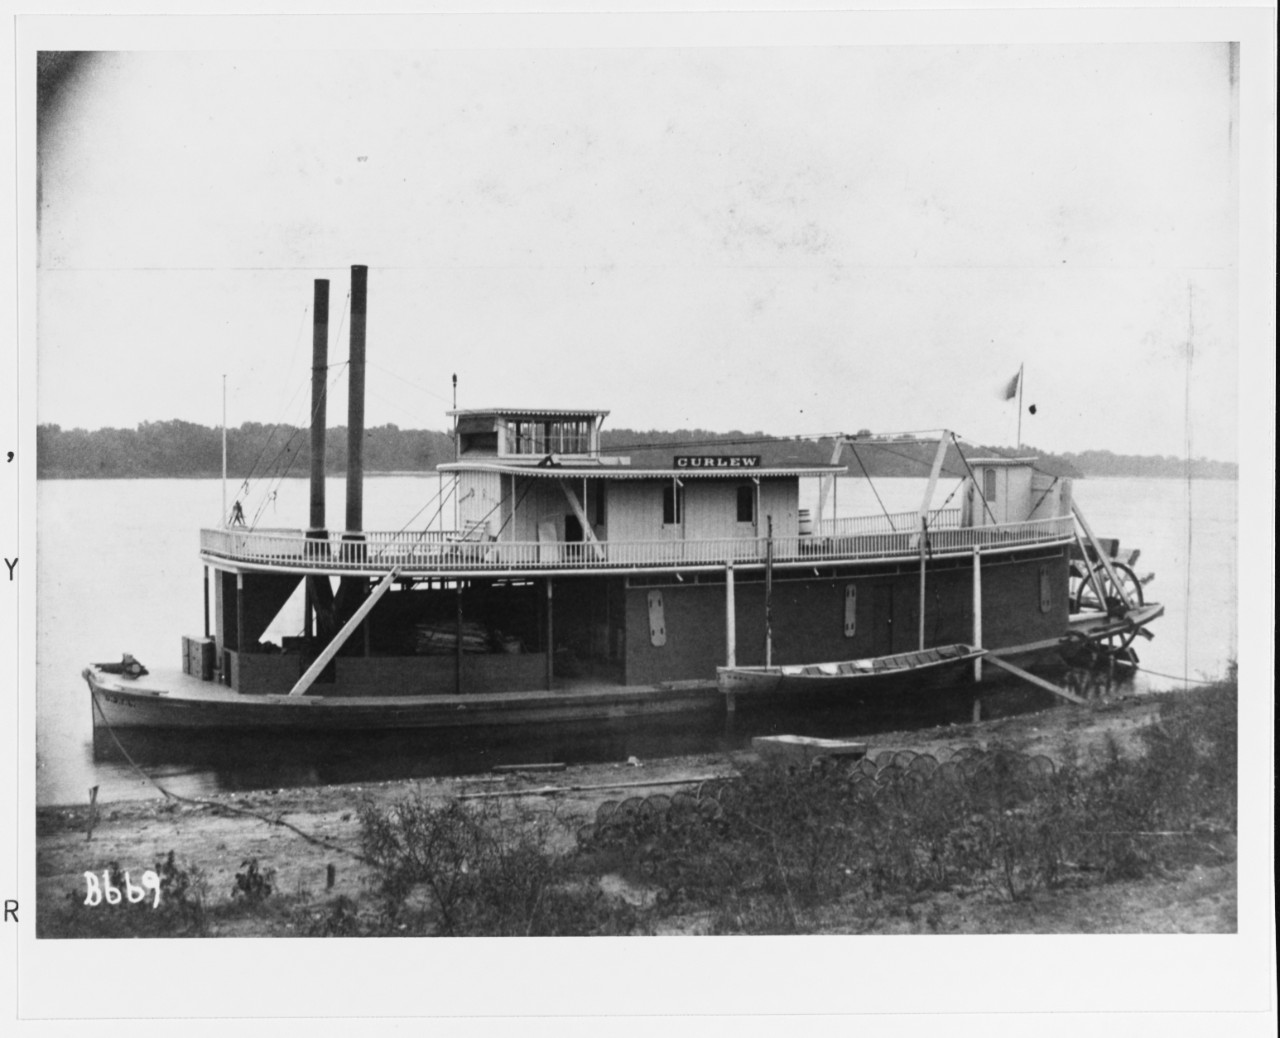 U.S. Fish Commission Steamer CURLEW